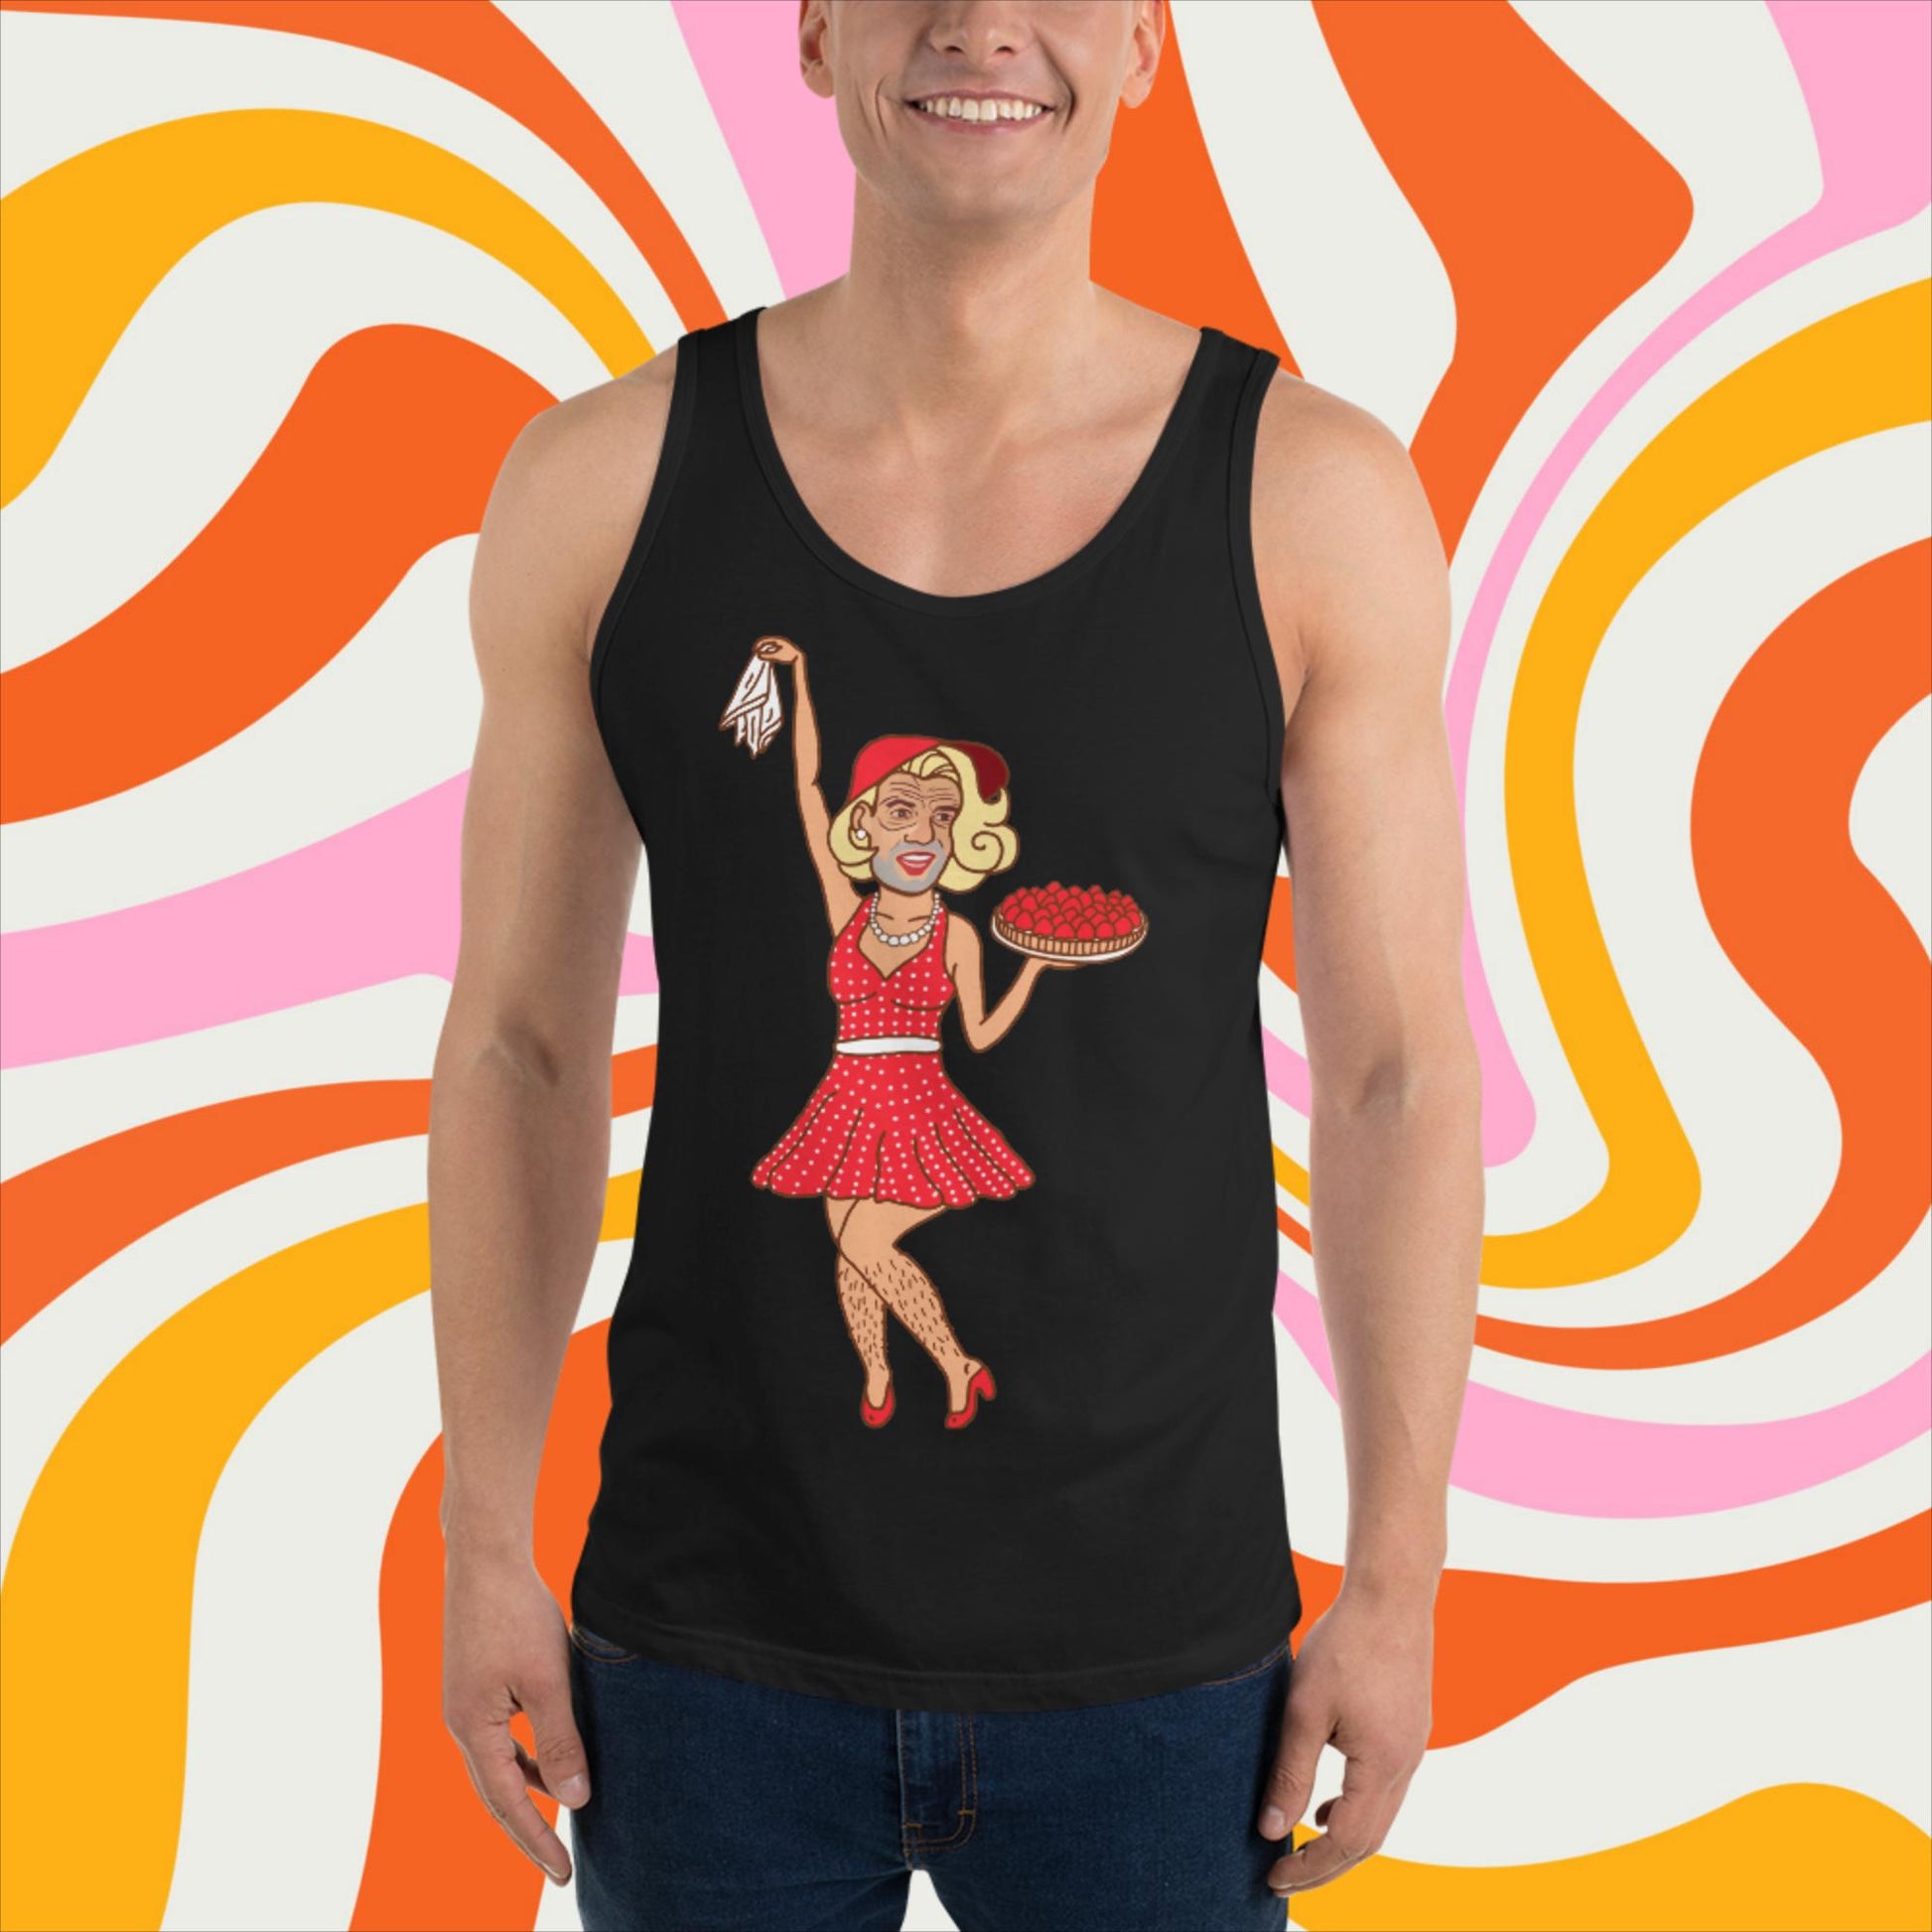 Thinnn Boy Bake Club The Fighter and The Kid TFATK Podcast Comedy 60s retro housewife Bryan Callen Tank Top Next Cult Brand